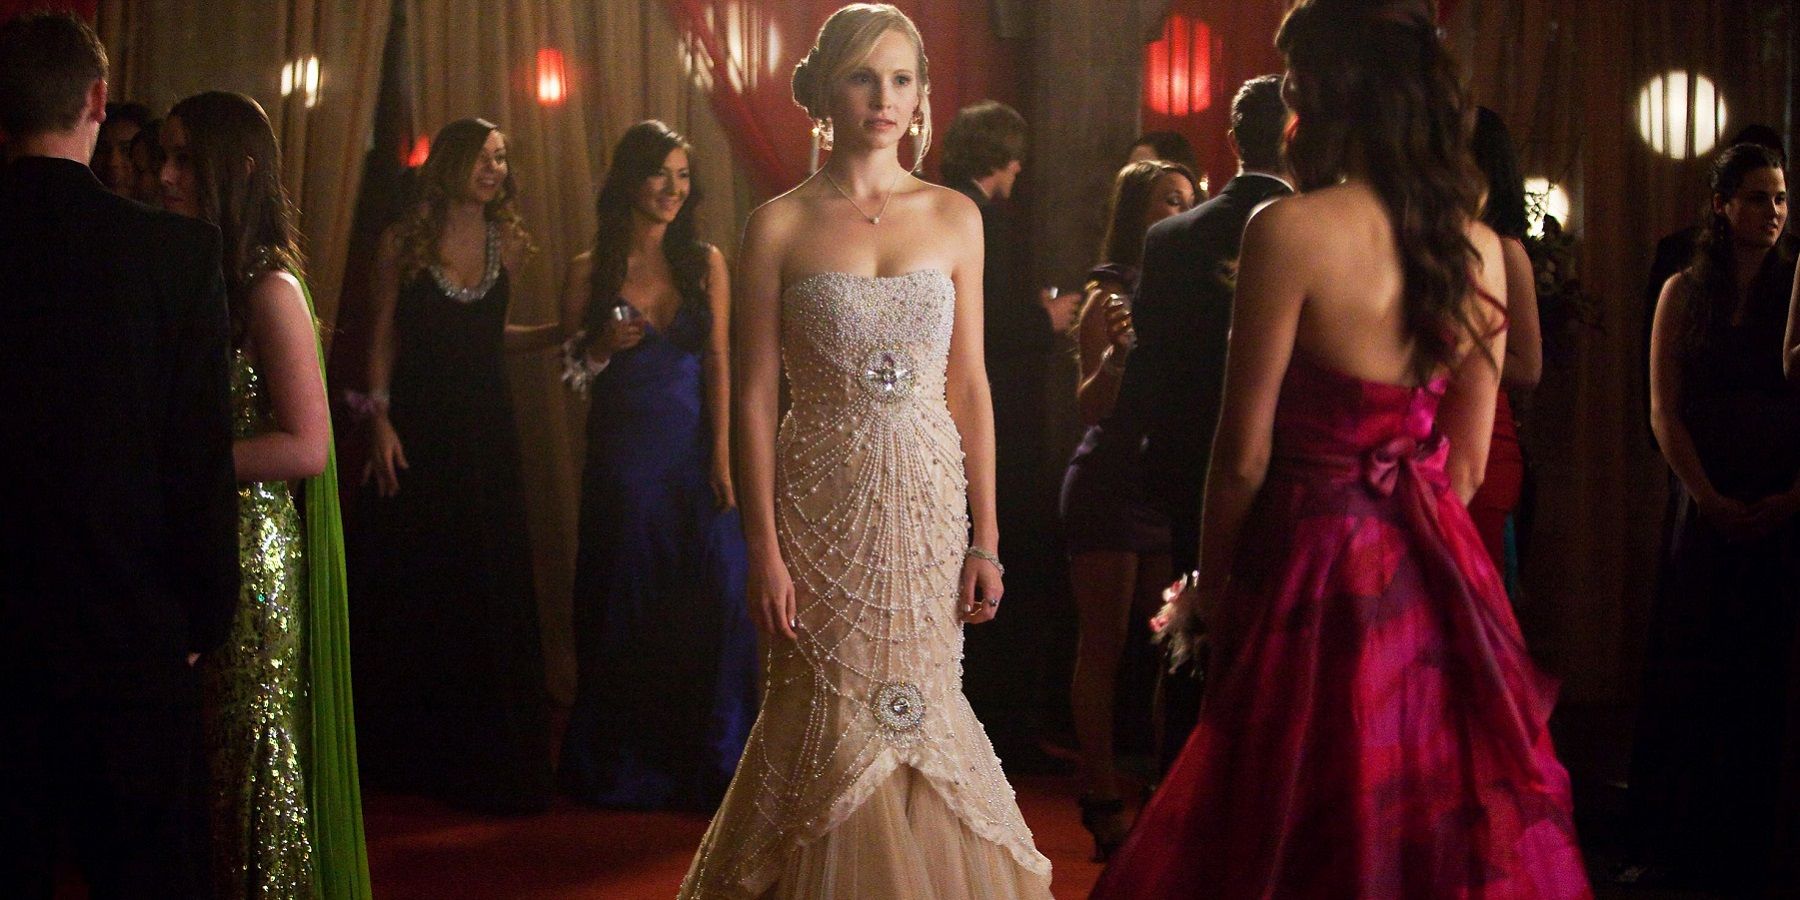 Caroline Elena Prom The Vampire Diaries 5 Best and Worst Outfits